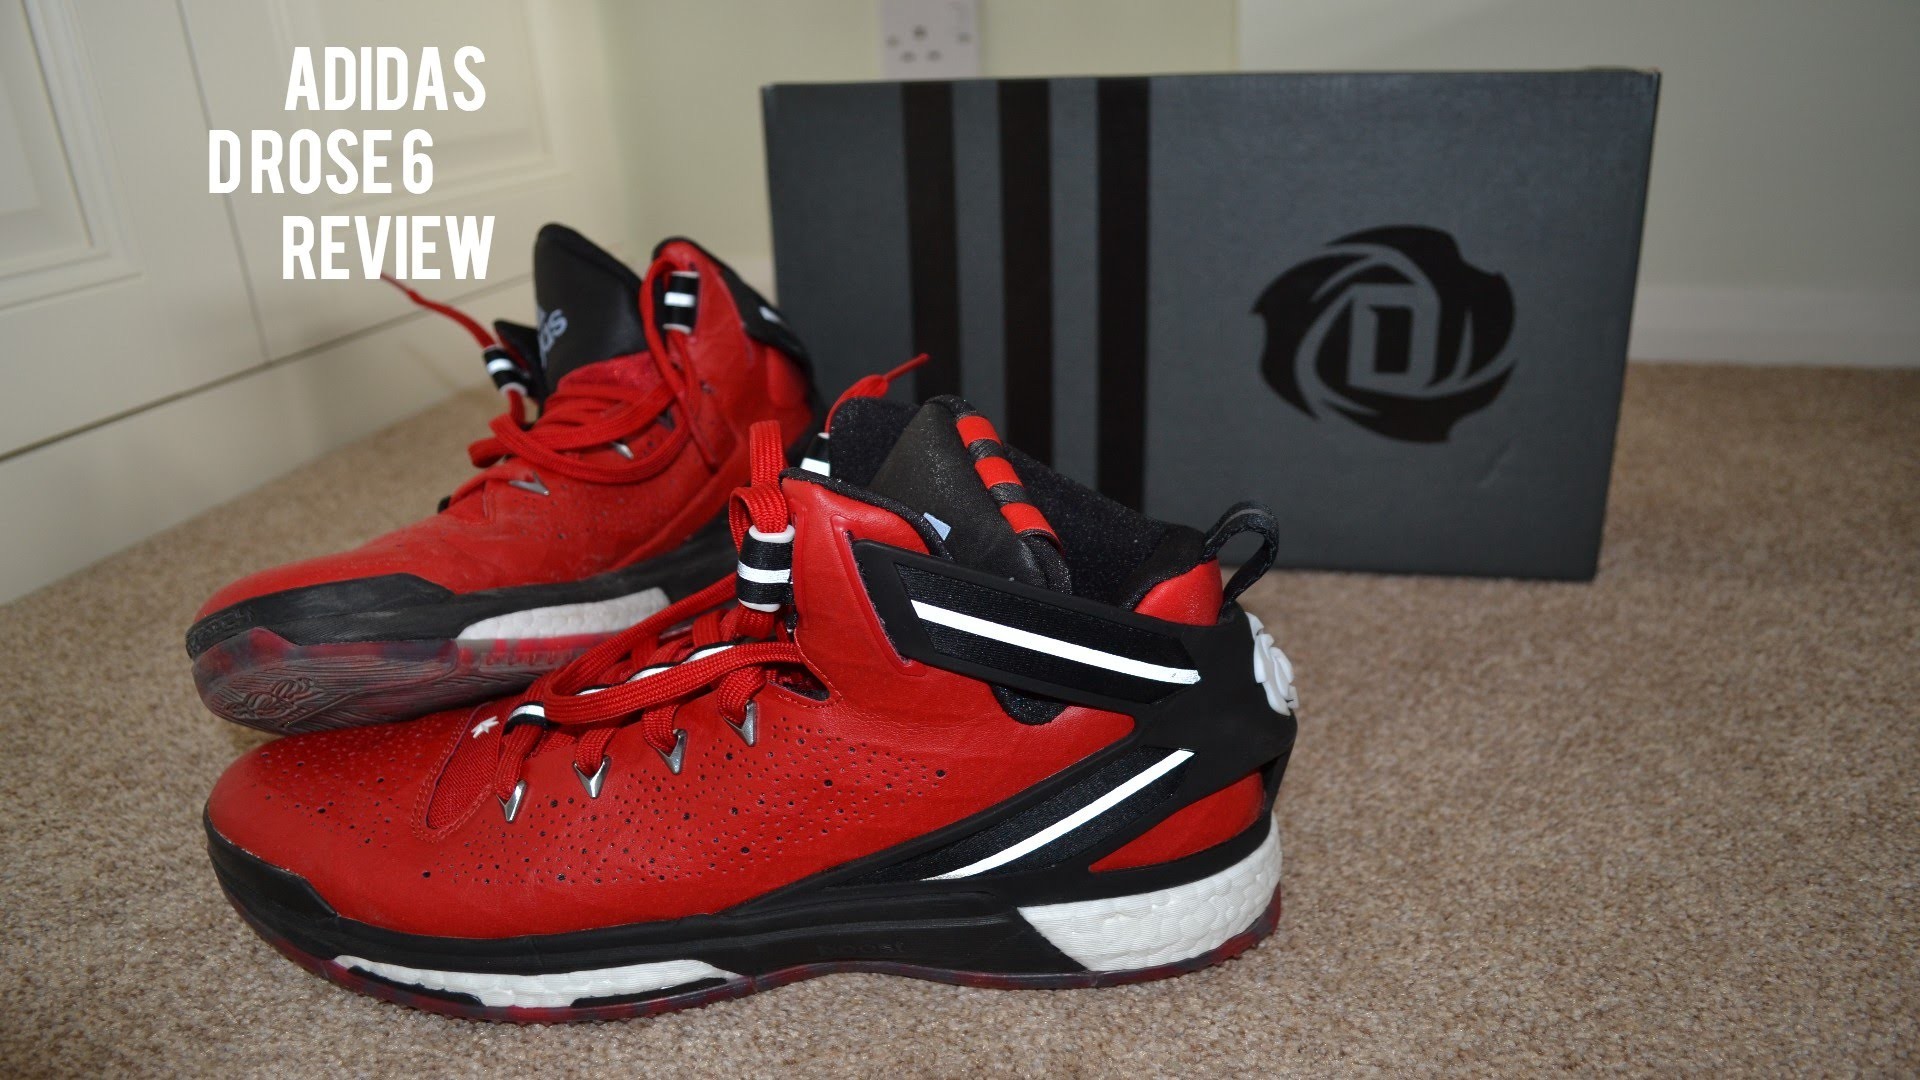 1920x1080 Adidas Derrick Rose 6 Men's Basketball Shoes Review/Performance talk  (February 2016) - YouTube